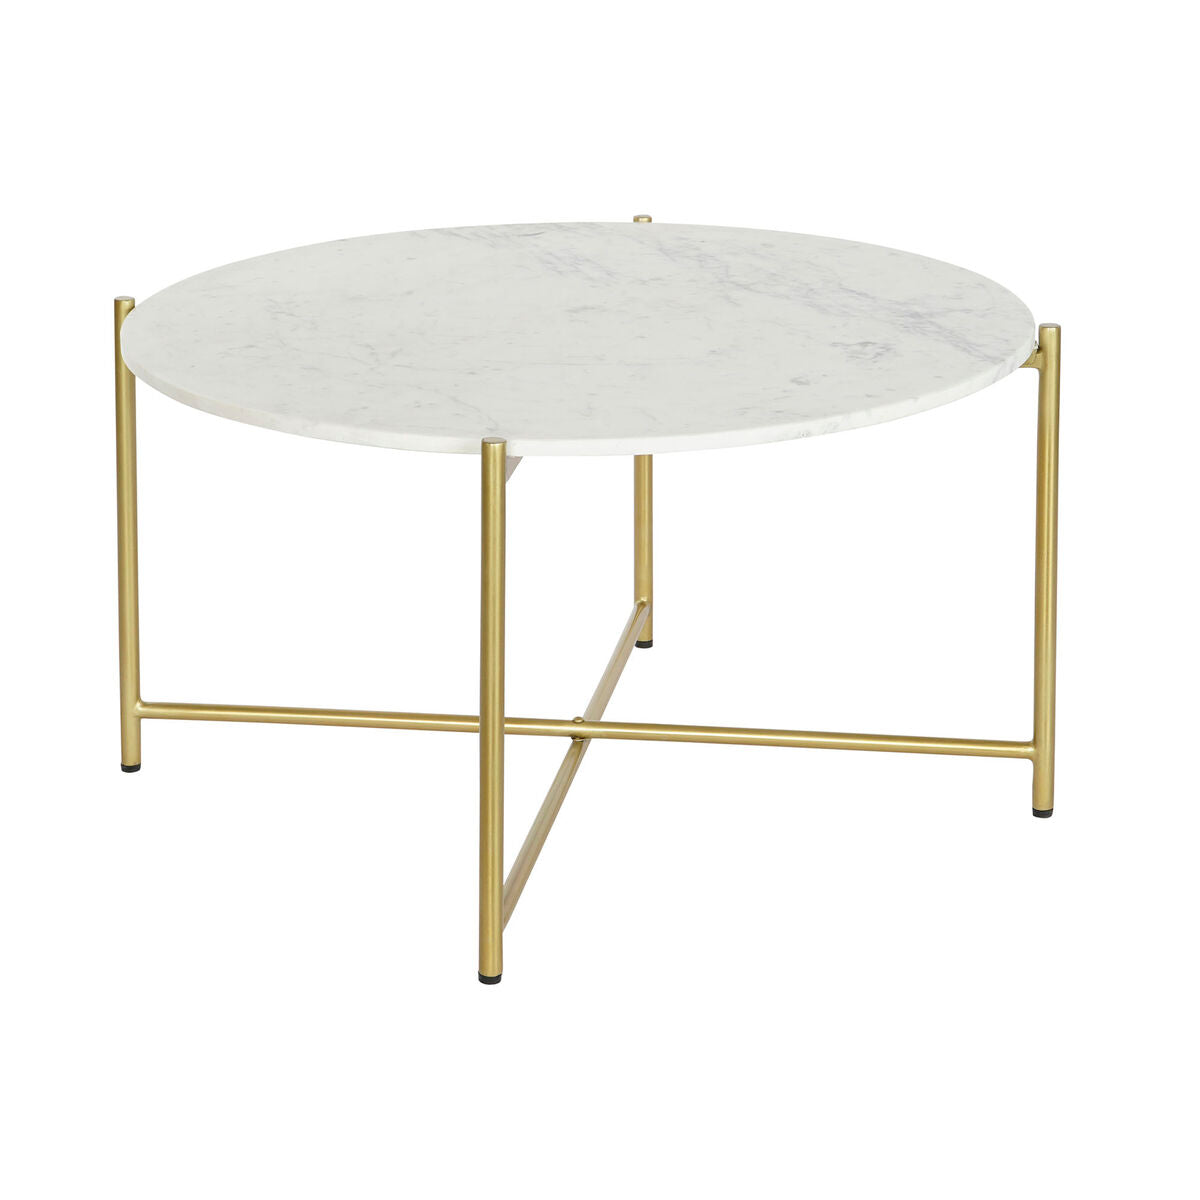 Centre Table in Marble and Golden Metal Legs (81 x 81 x 44 cm)